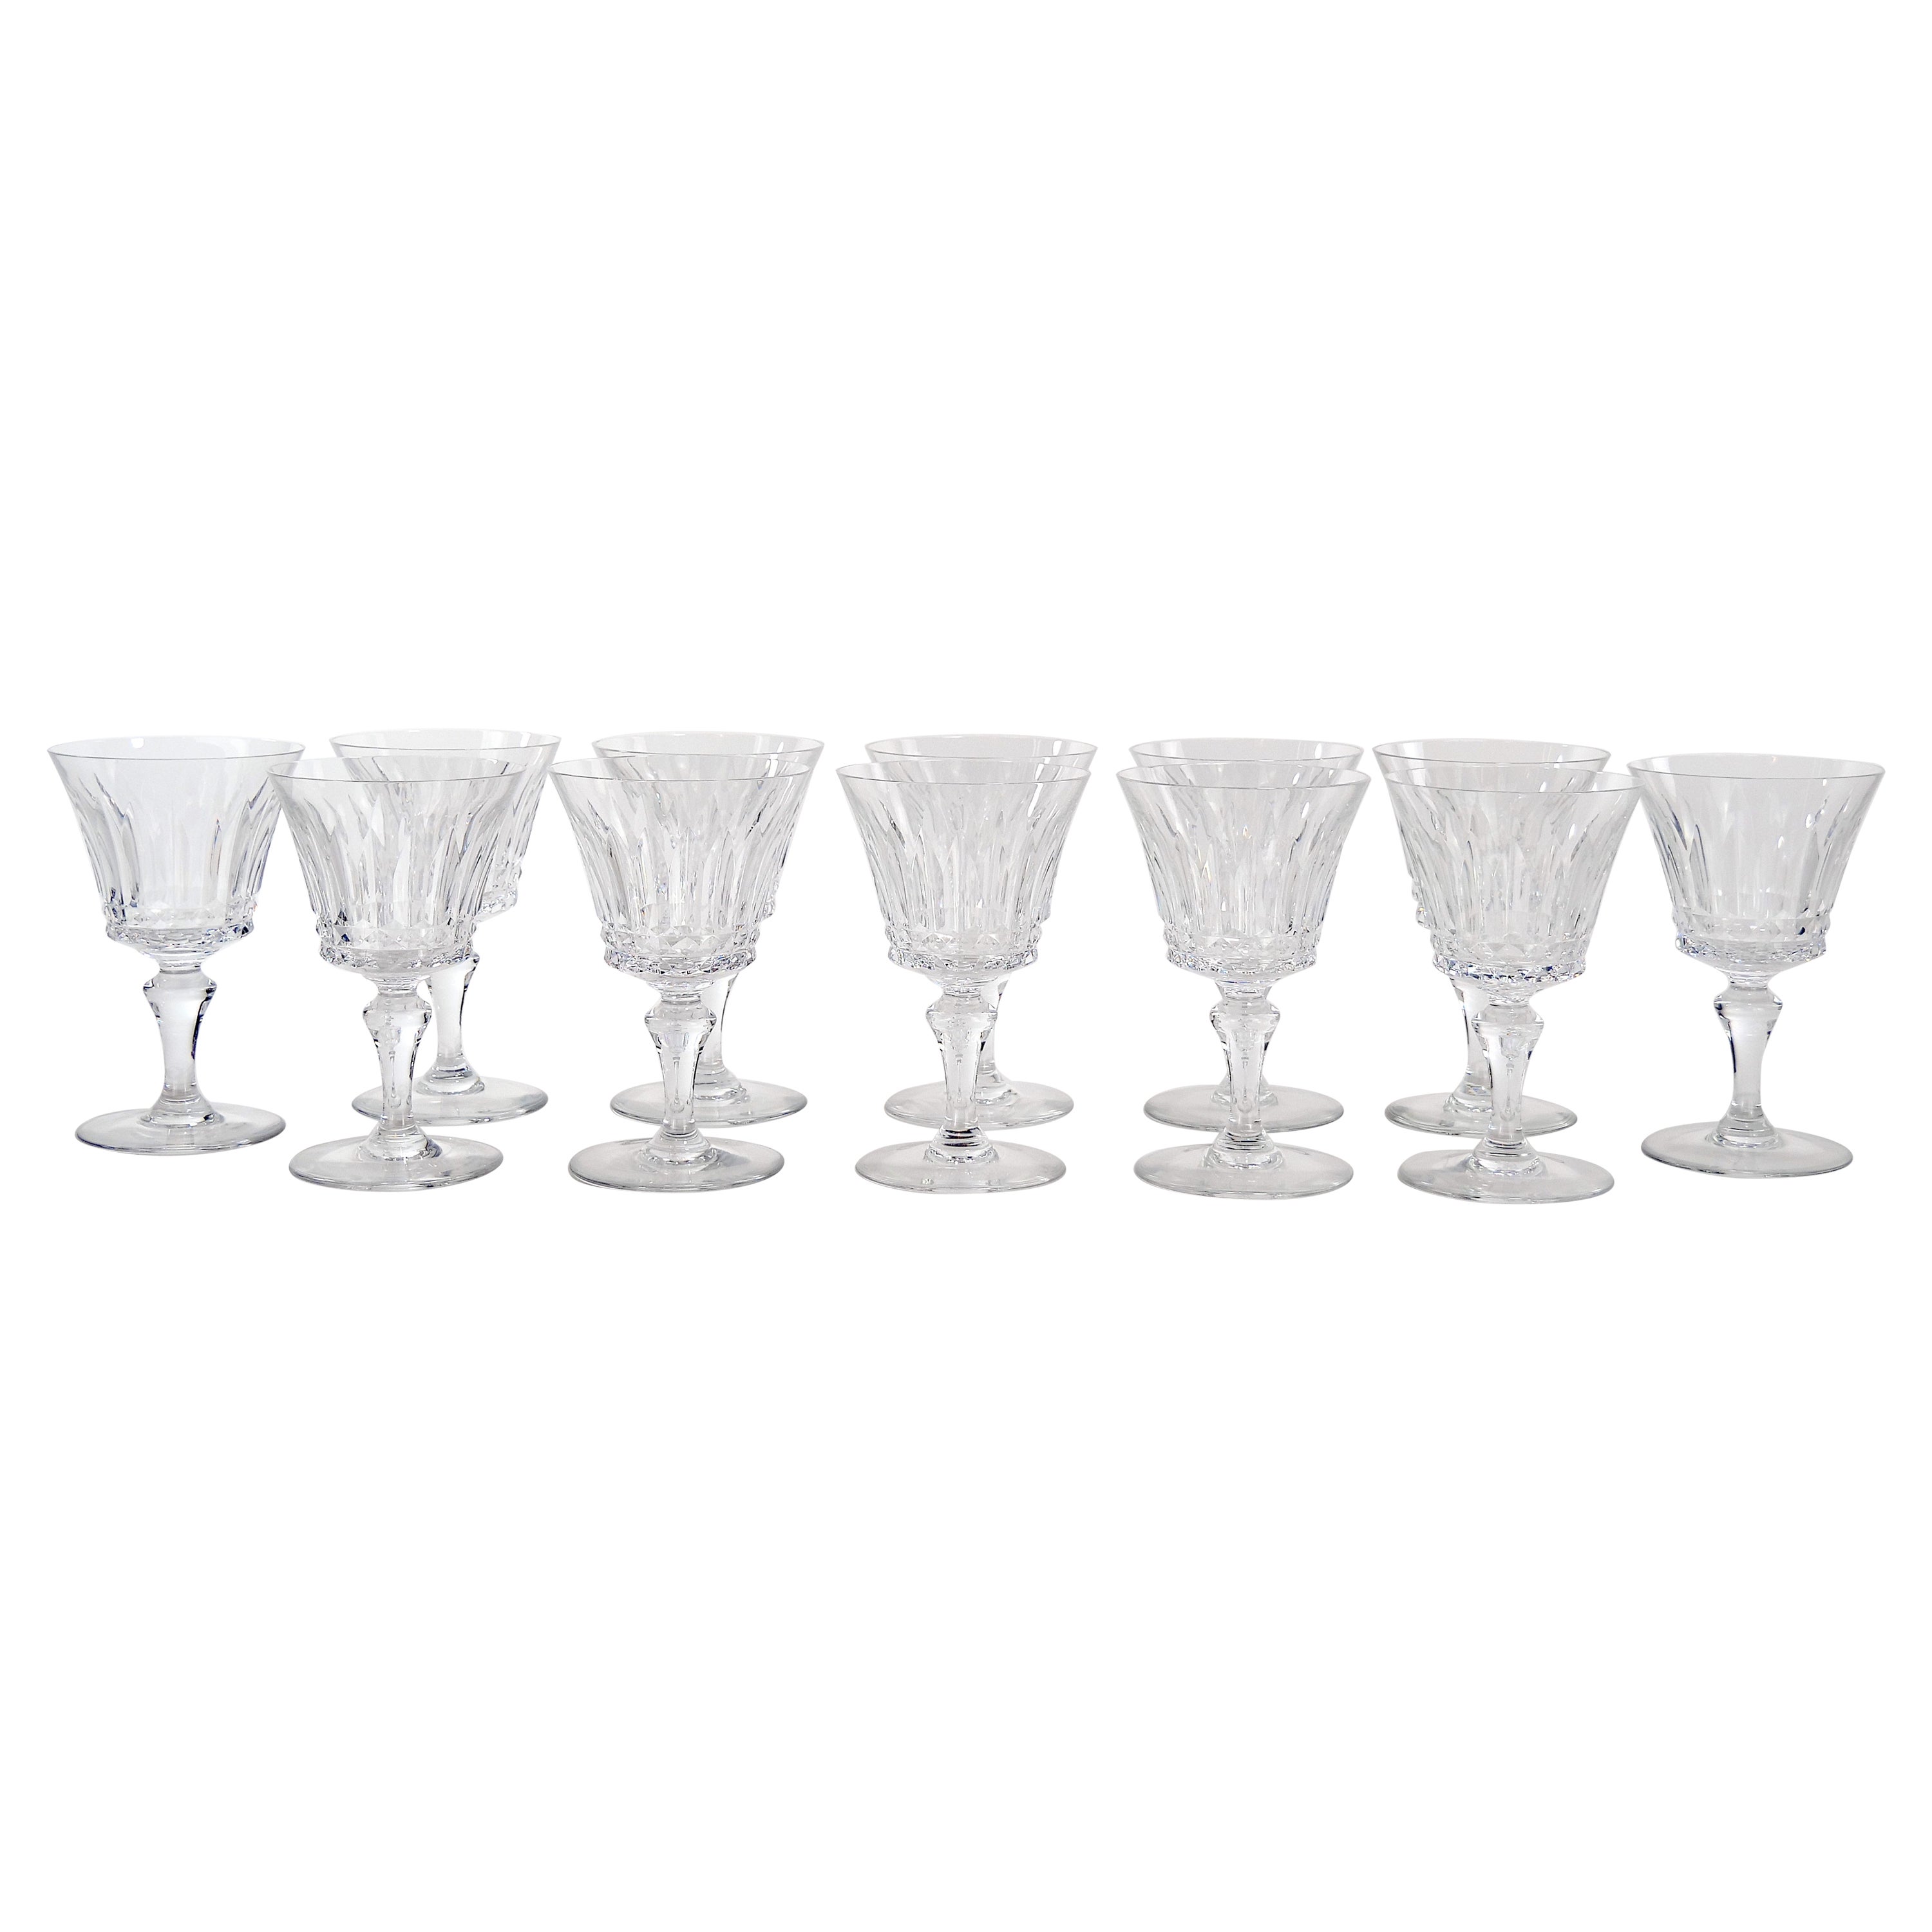 Tall Baccarat Crystal Barware / Tableware Service / 12 People For Sale